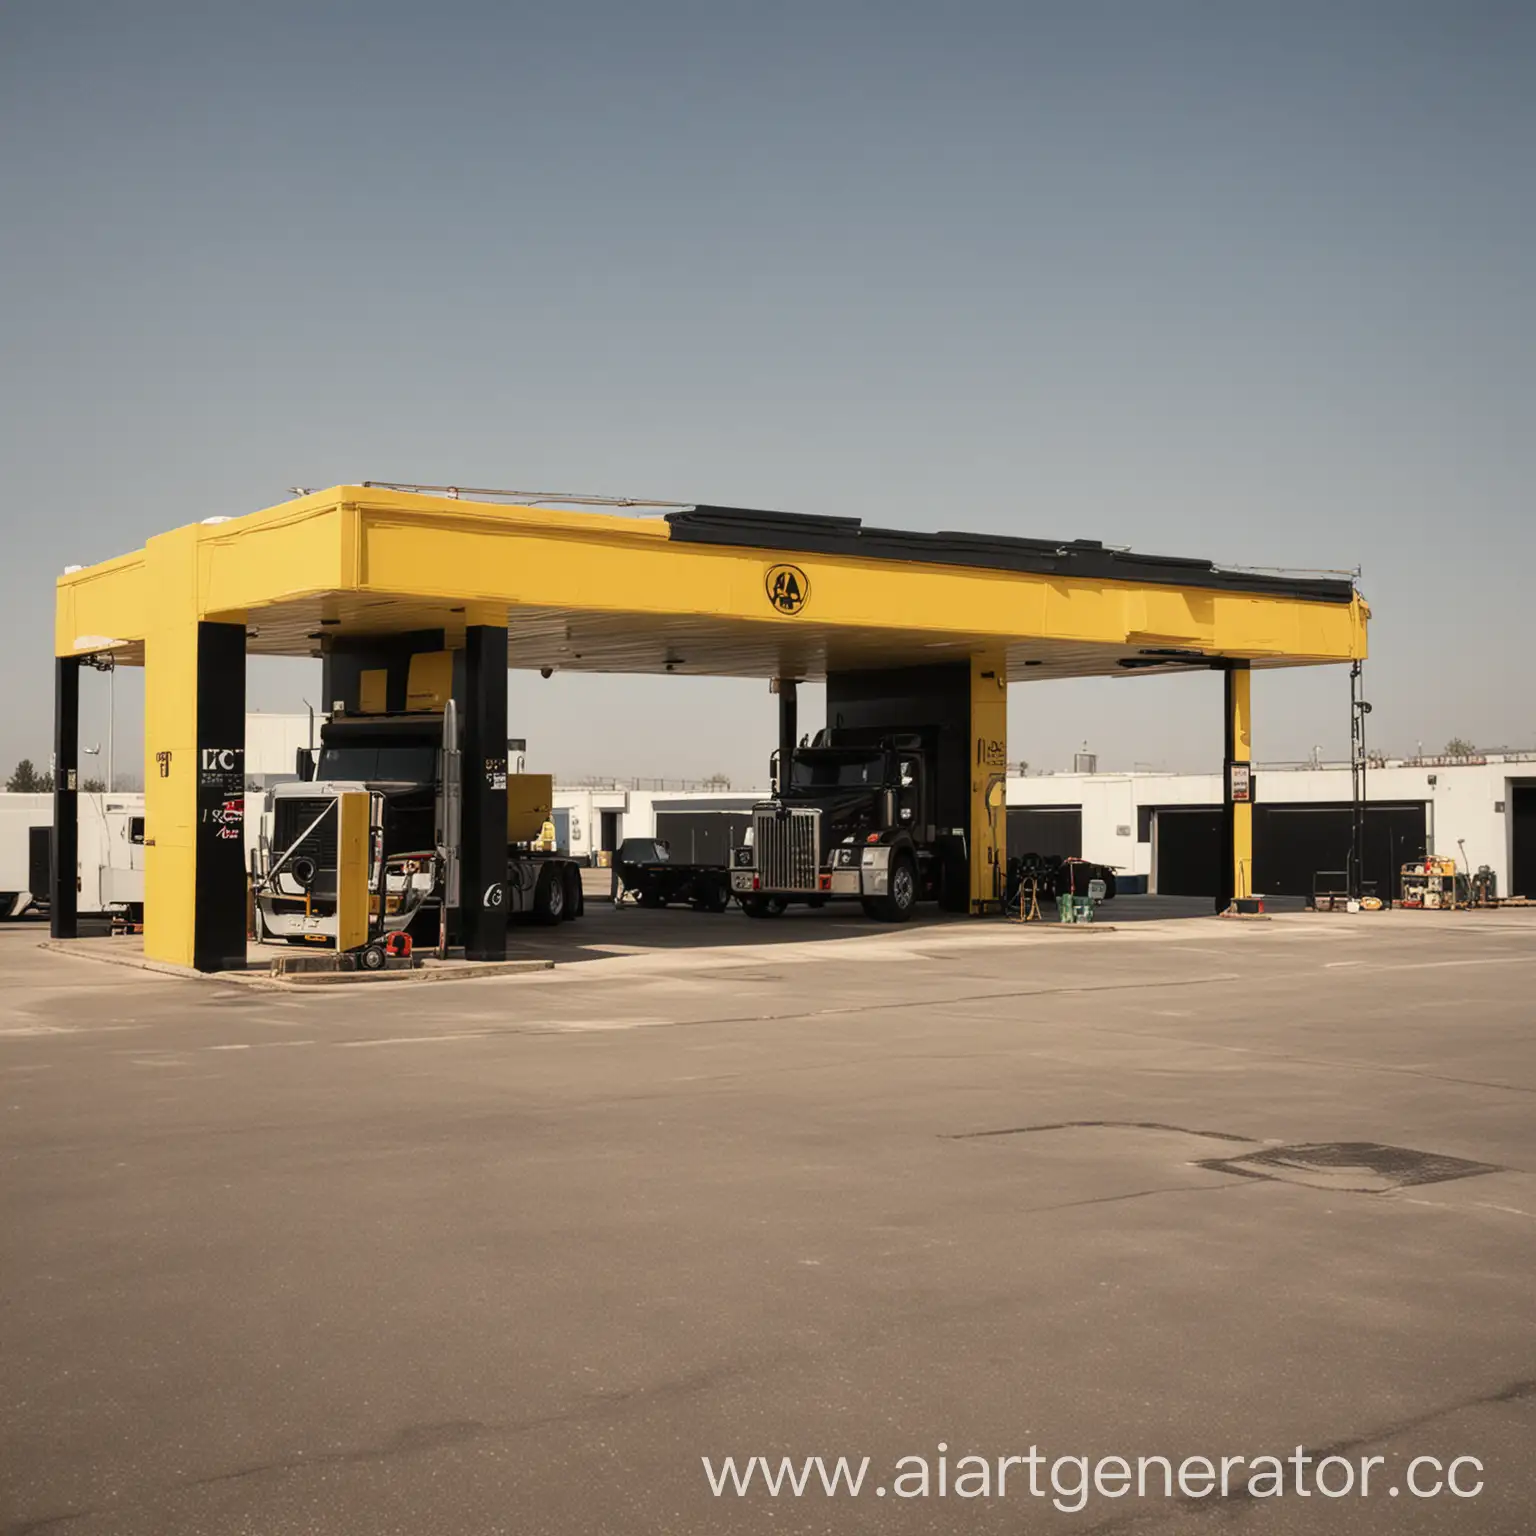 A service station for trucks. The walls are painted yellow and black.